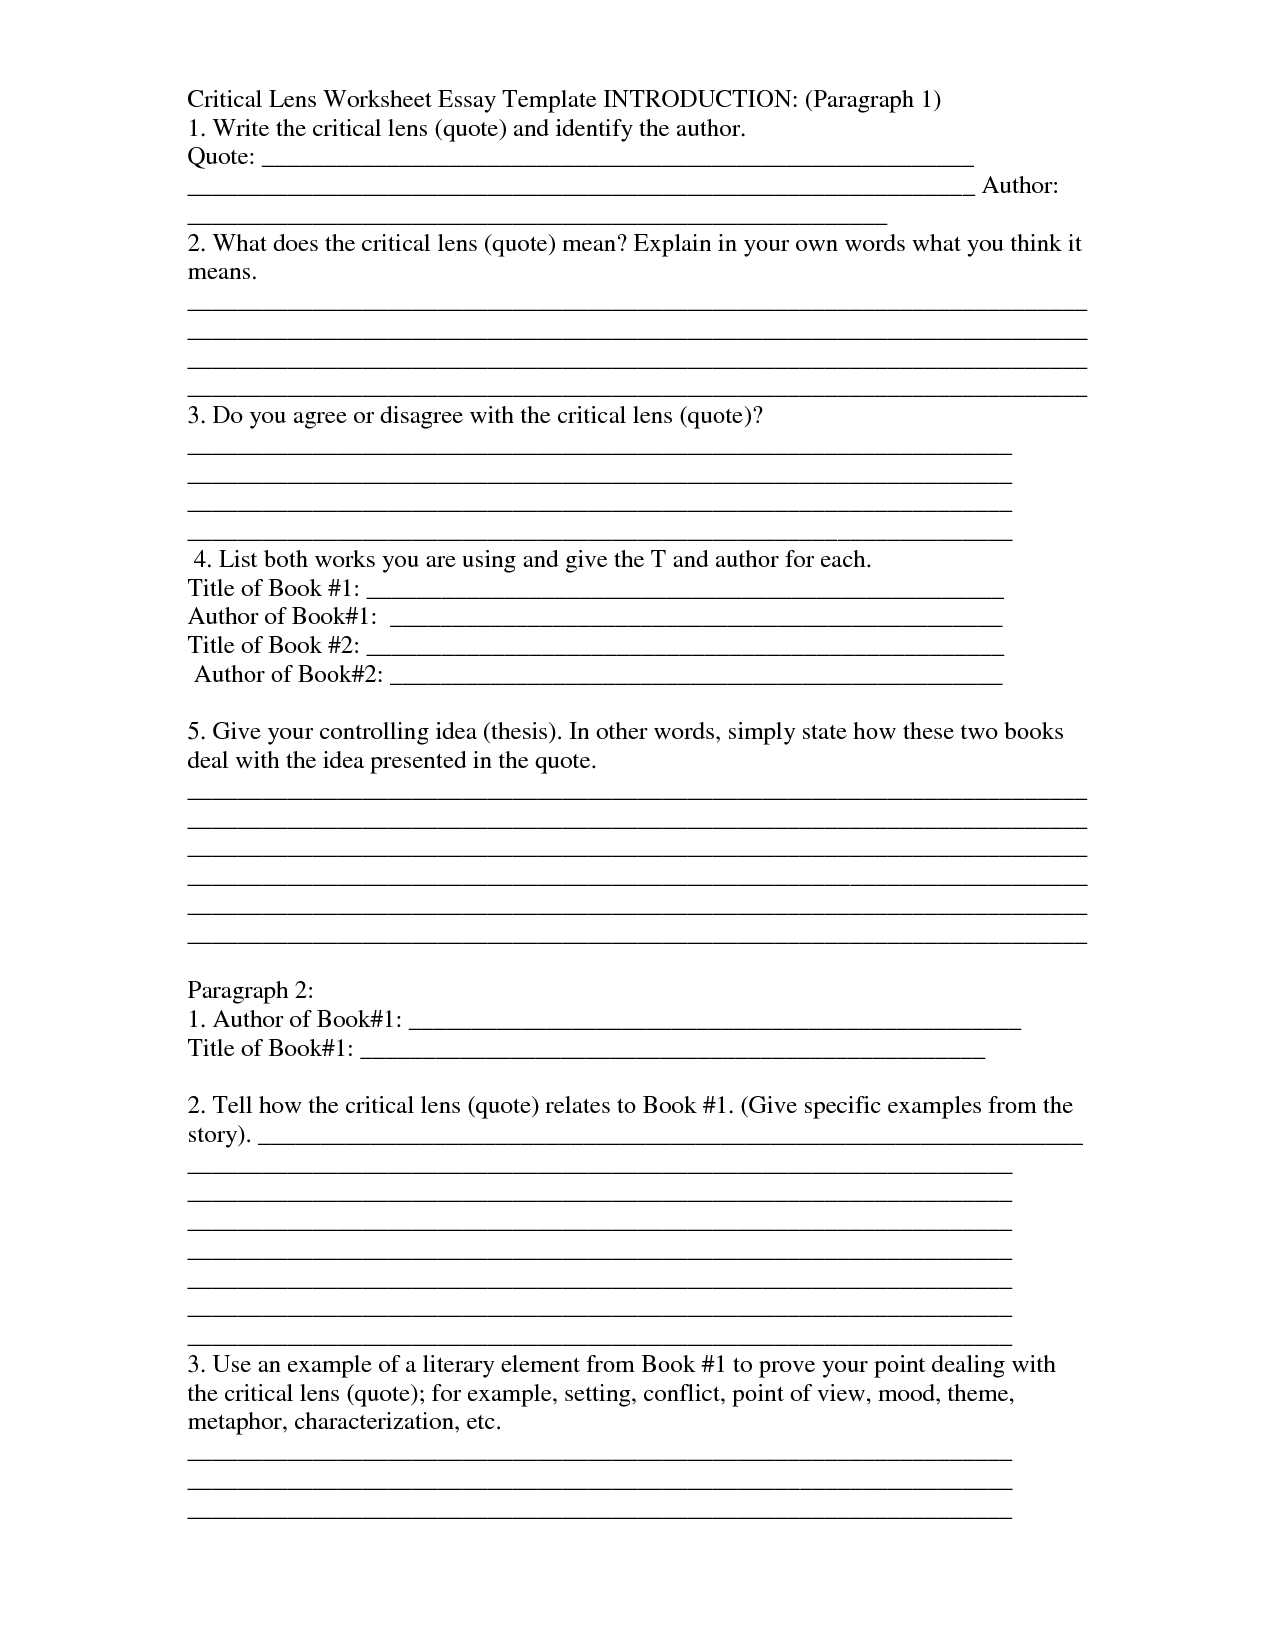 Hyperbole Worksheet 1 Answers Along with Critical Lens Worksheet Essay Template Introduction Paragraph 1